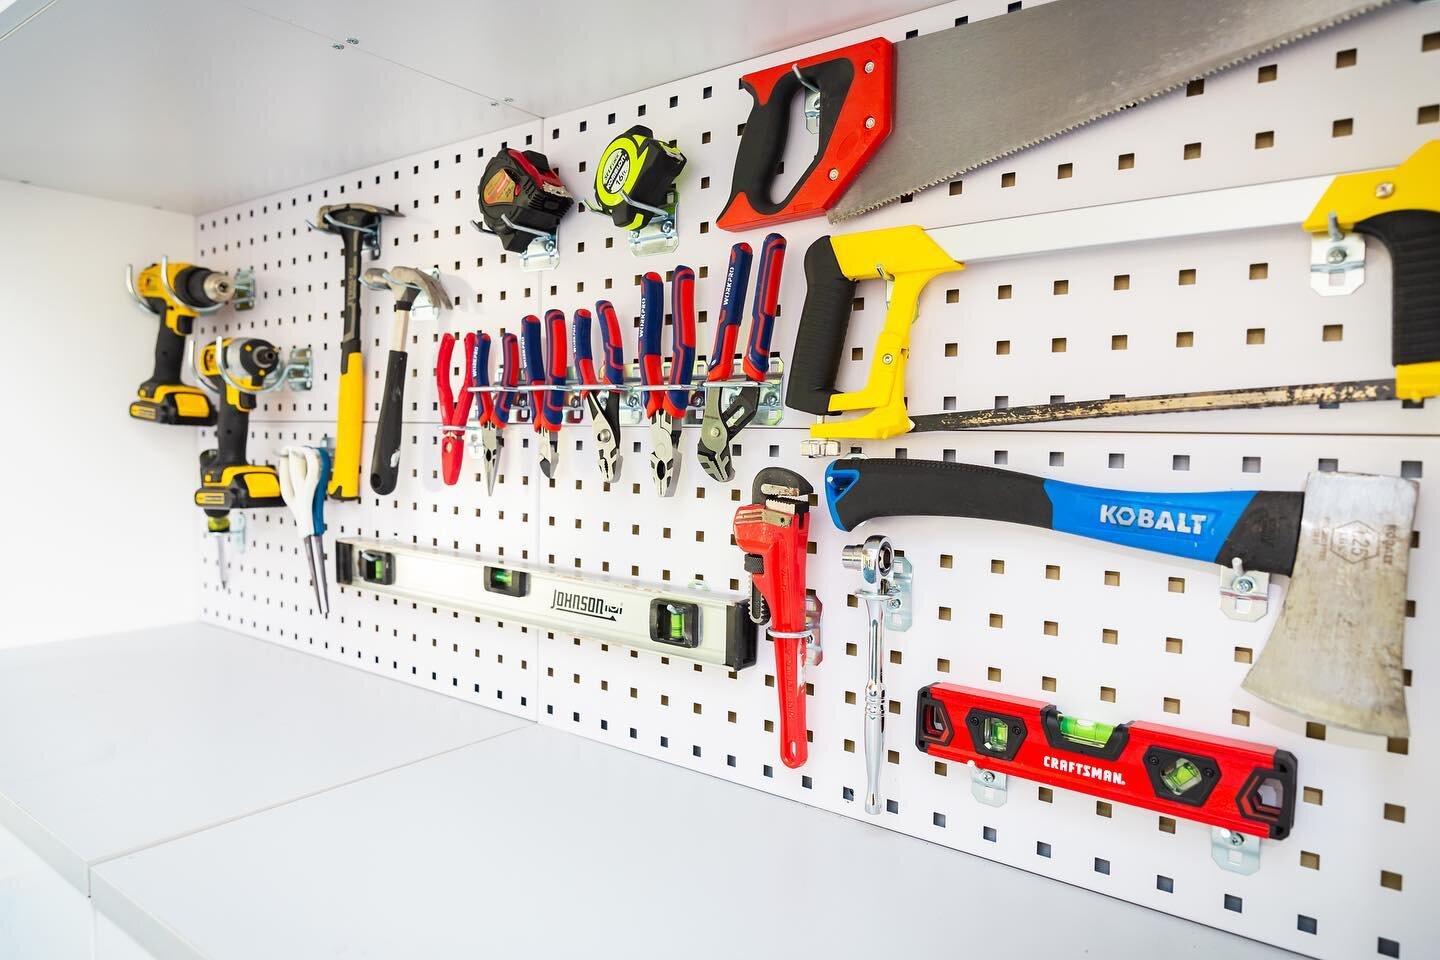 Who knew tool storage could be so satisfying 🛠️💪🏻 

#toolstorage #toolorganization #pegboardperfection